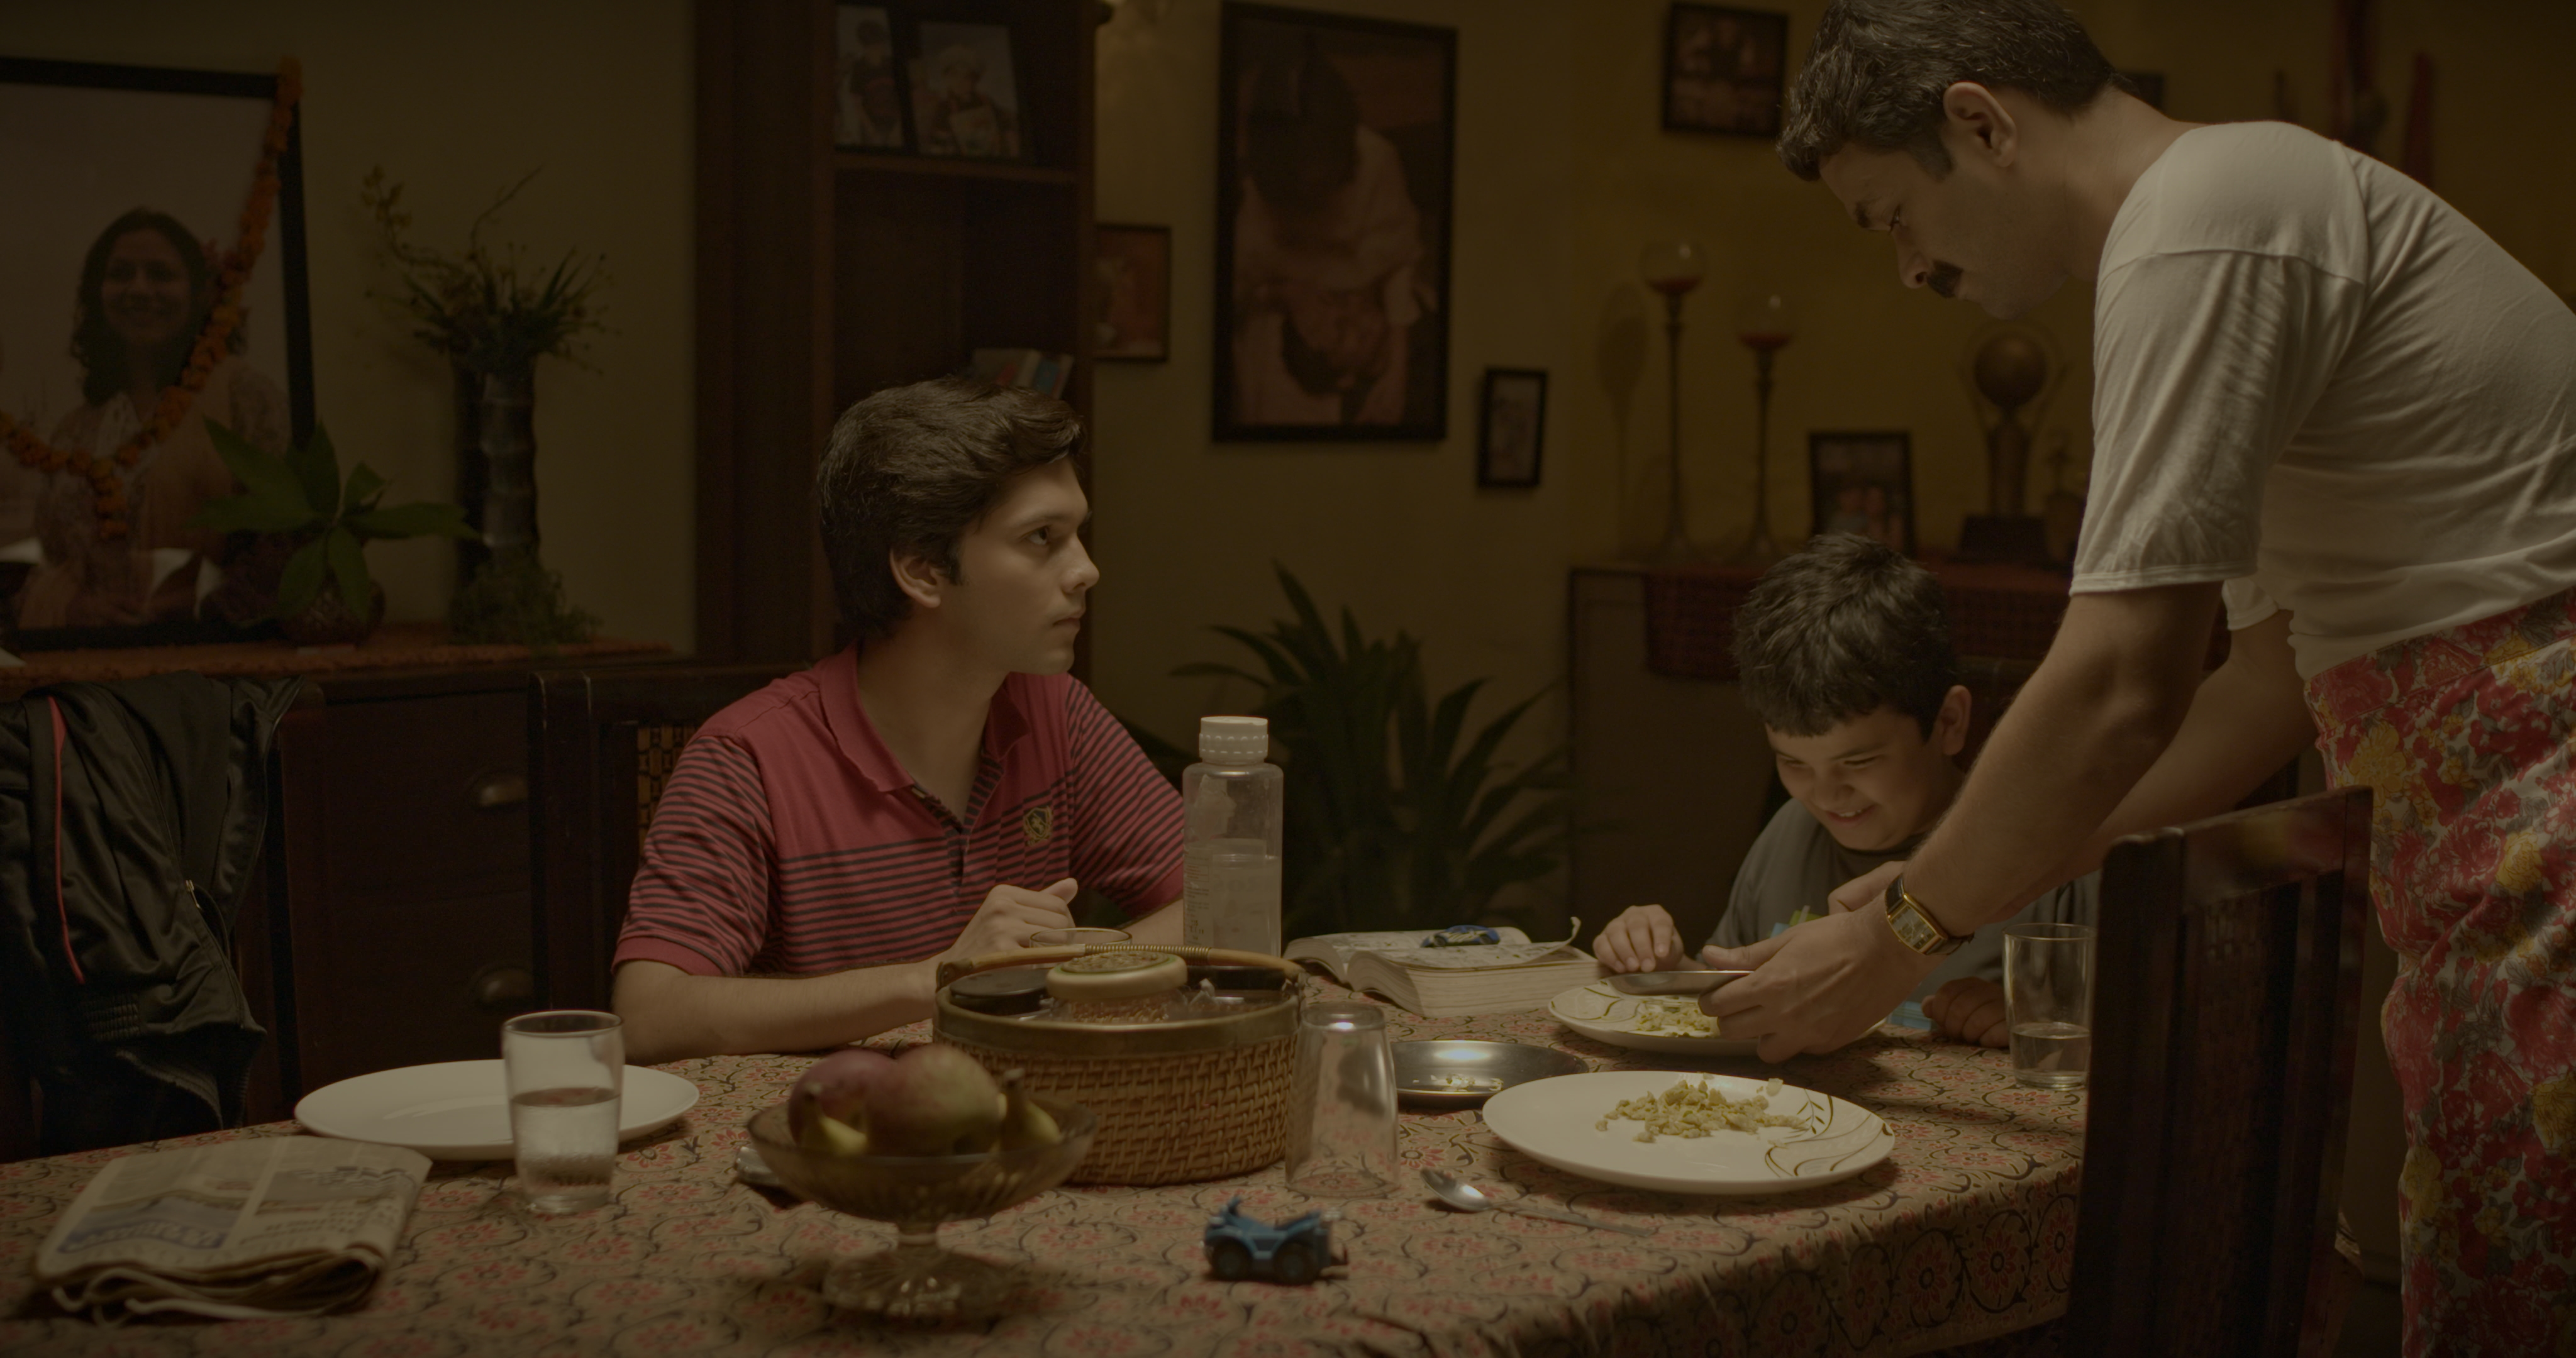 Still Image from Subah showing the cast gathered around a table with food.